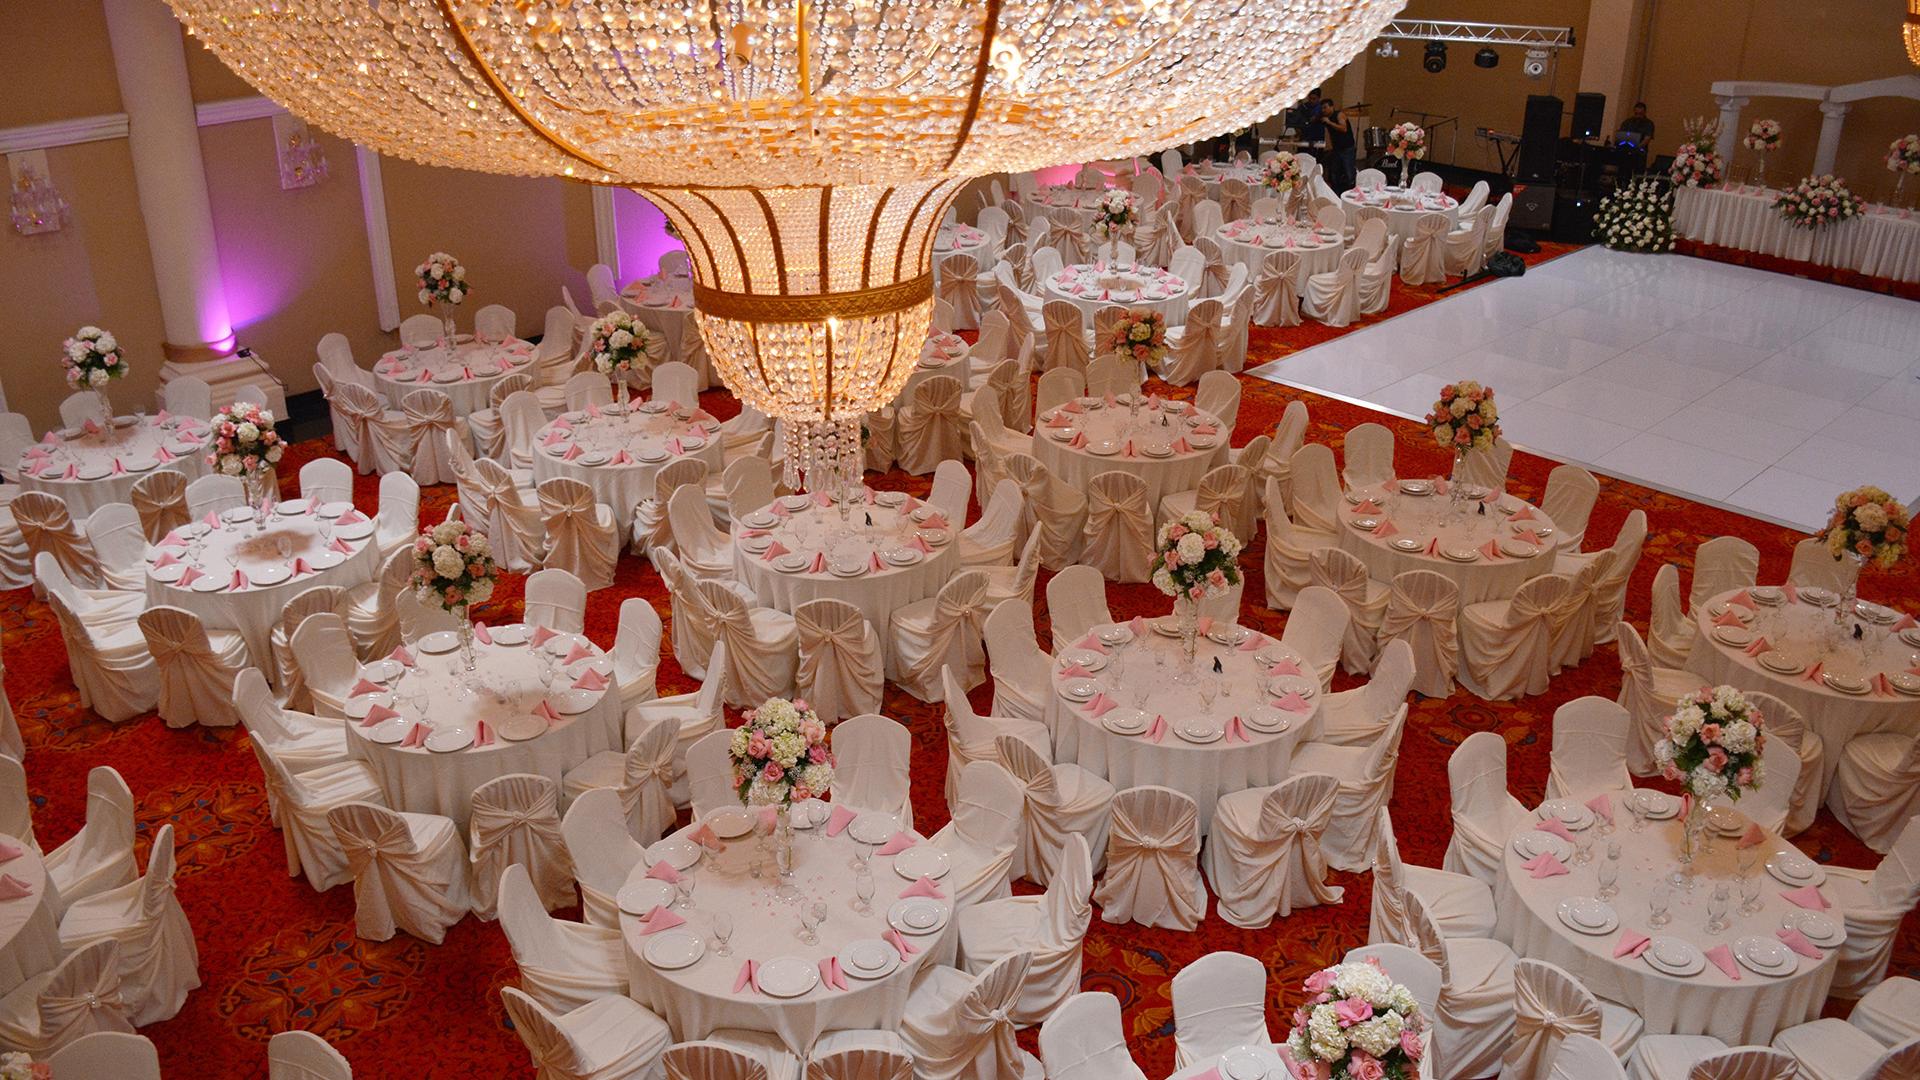 Hotel Wedding Venues for Rent in San Diego, CA